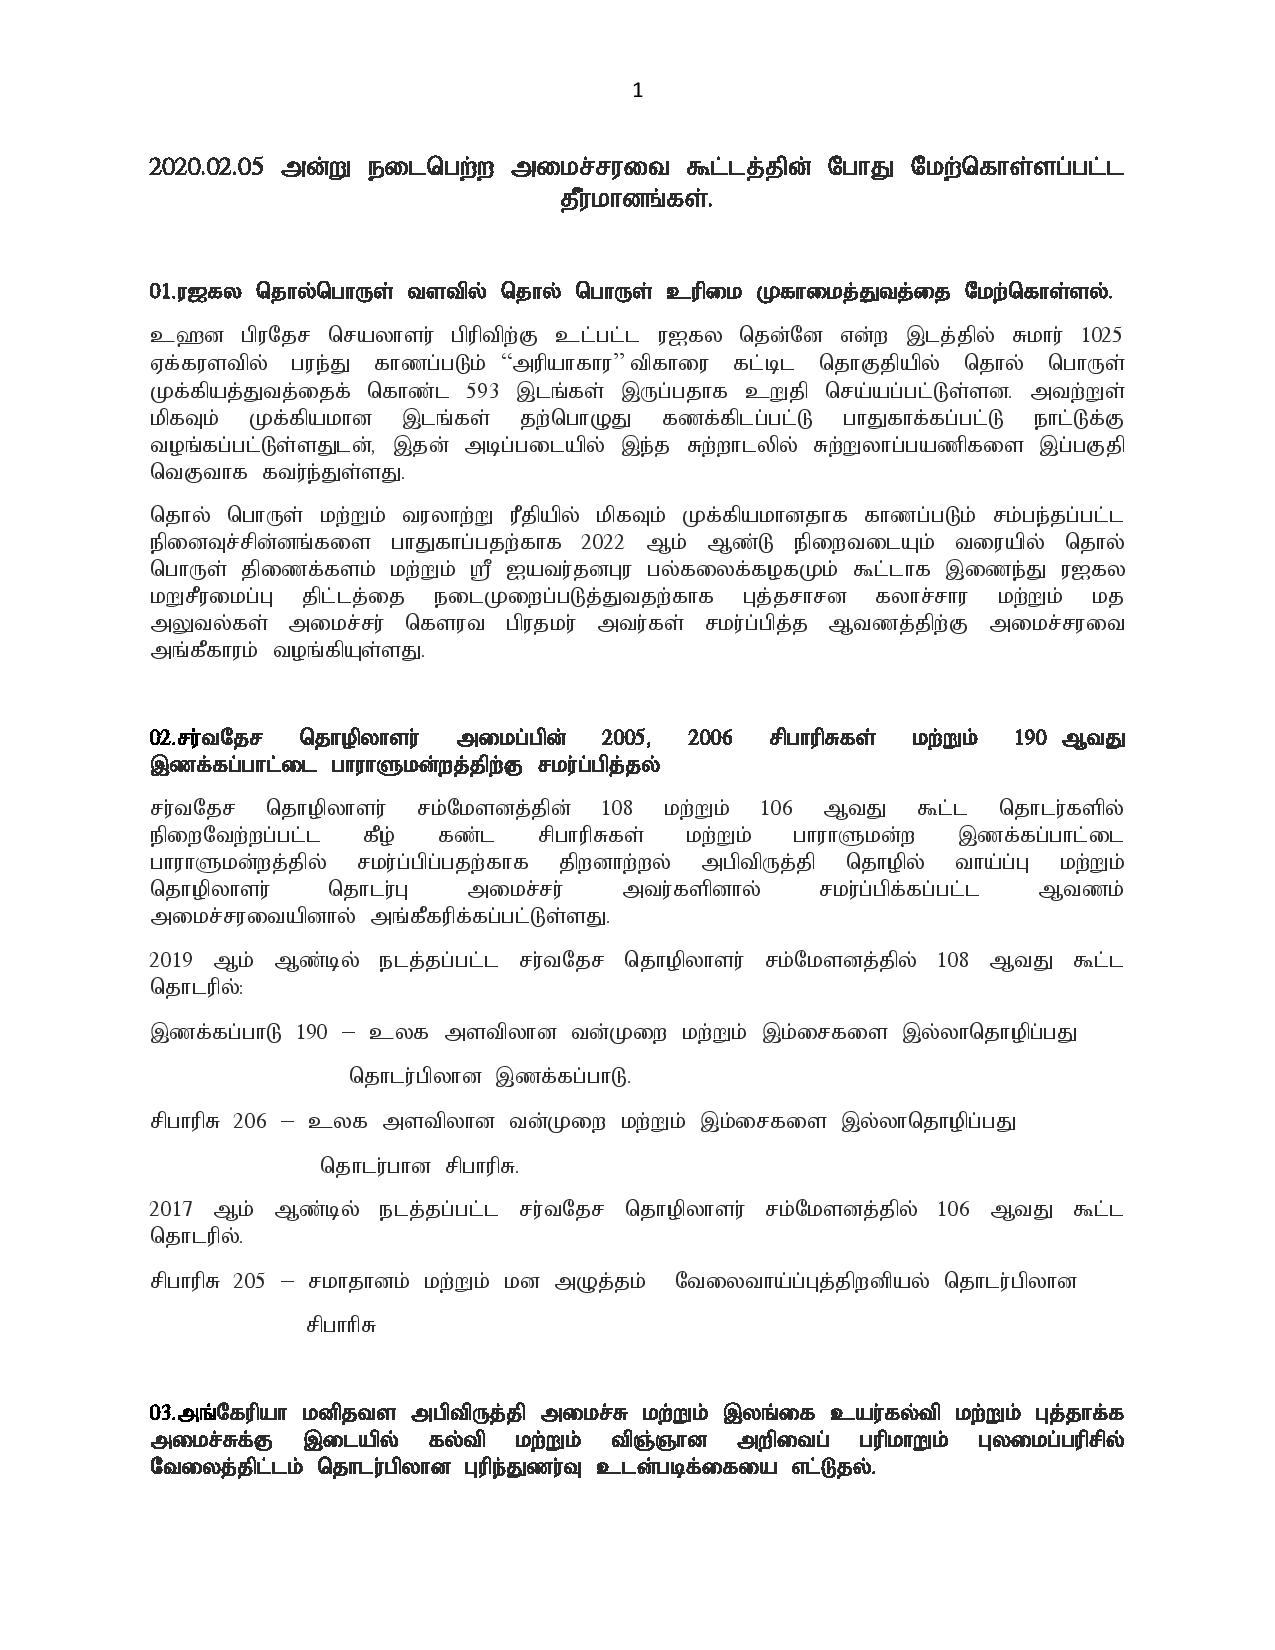 05.02.2020 Cabinet Tamil page 001